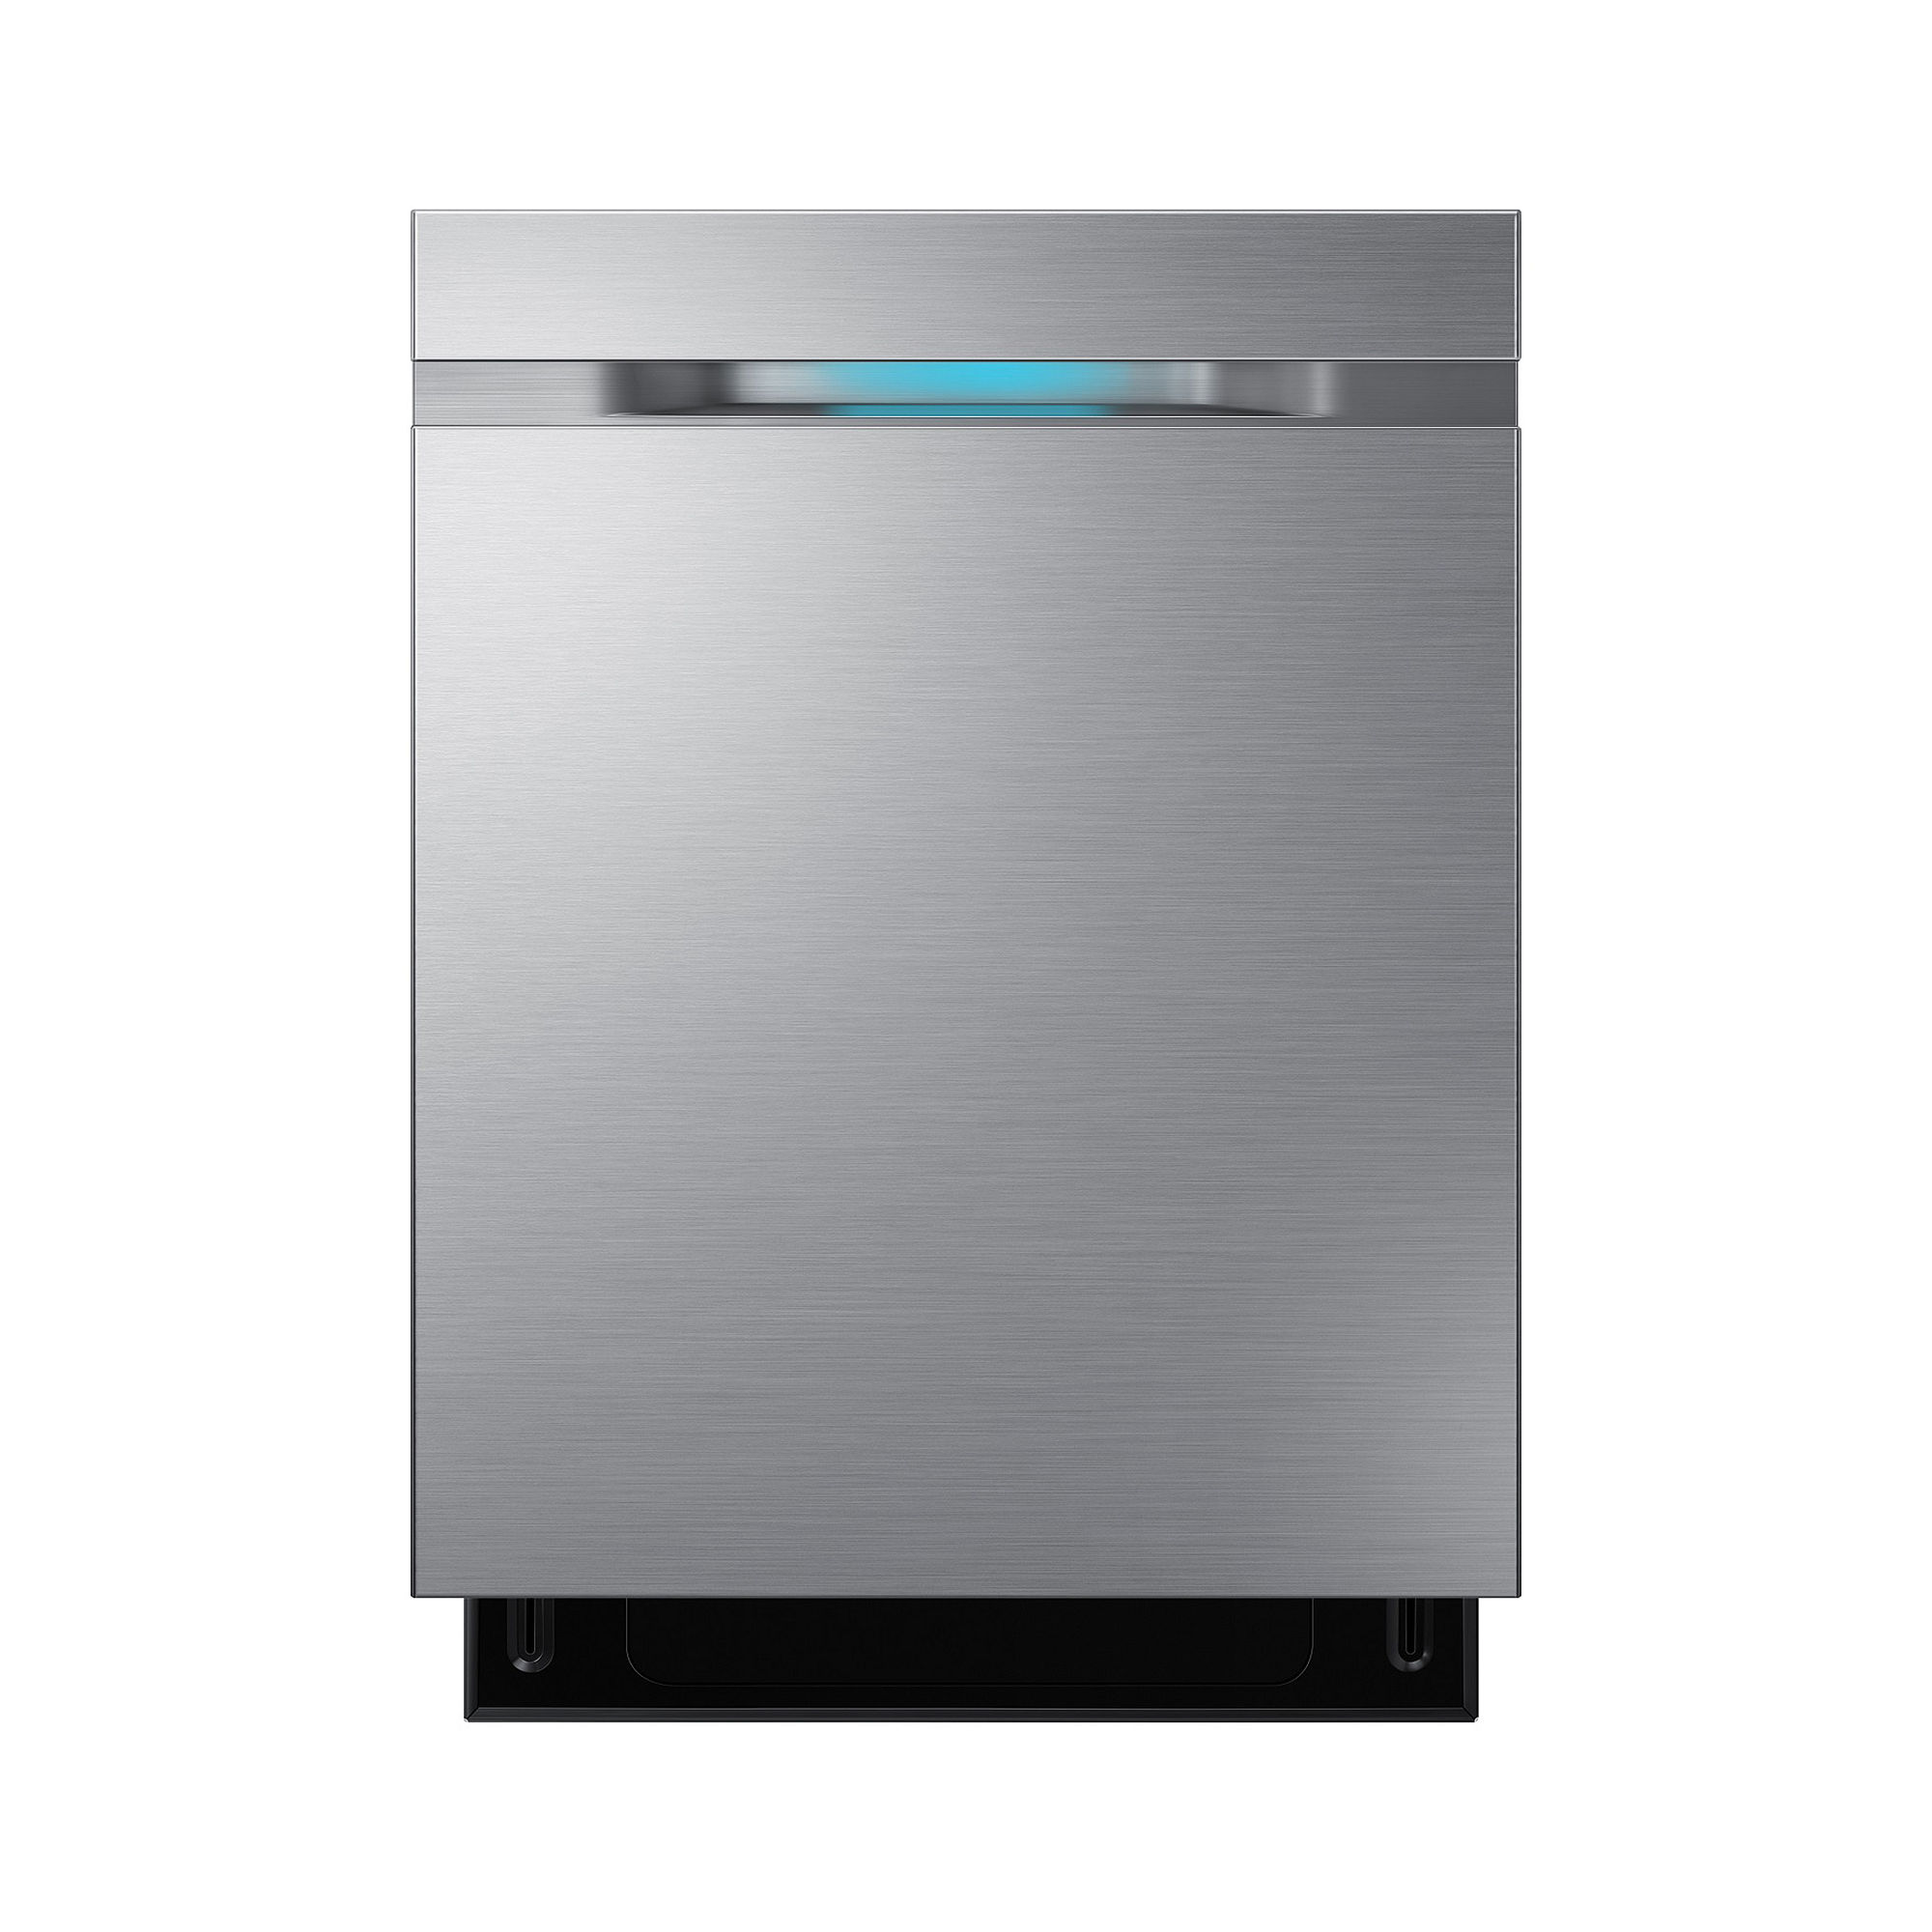 Samsung ENERGY STAR Top Control Dishwasher withWaterWall Technology - DW80J9945US\/AA